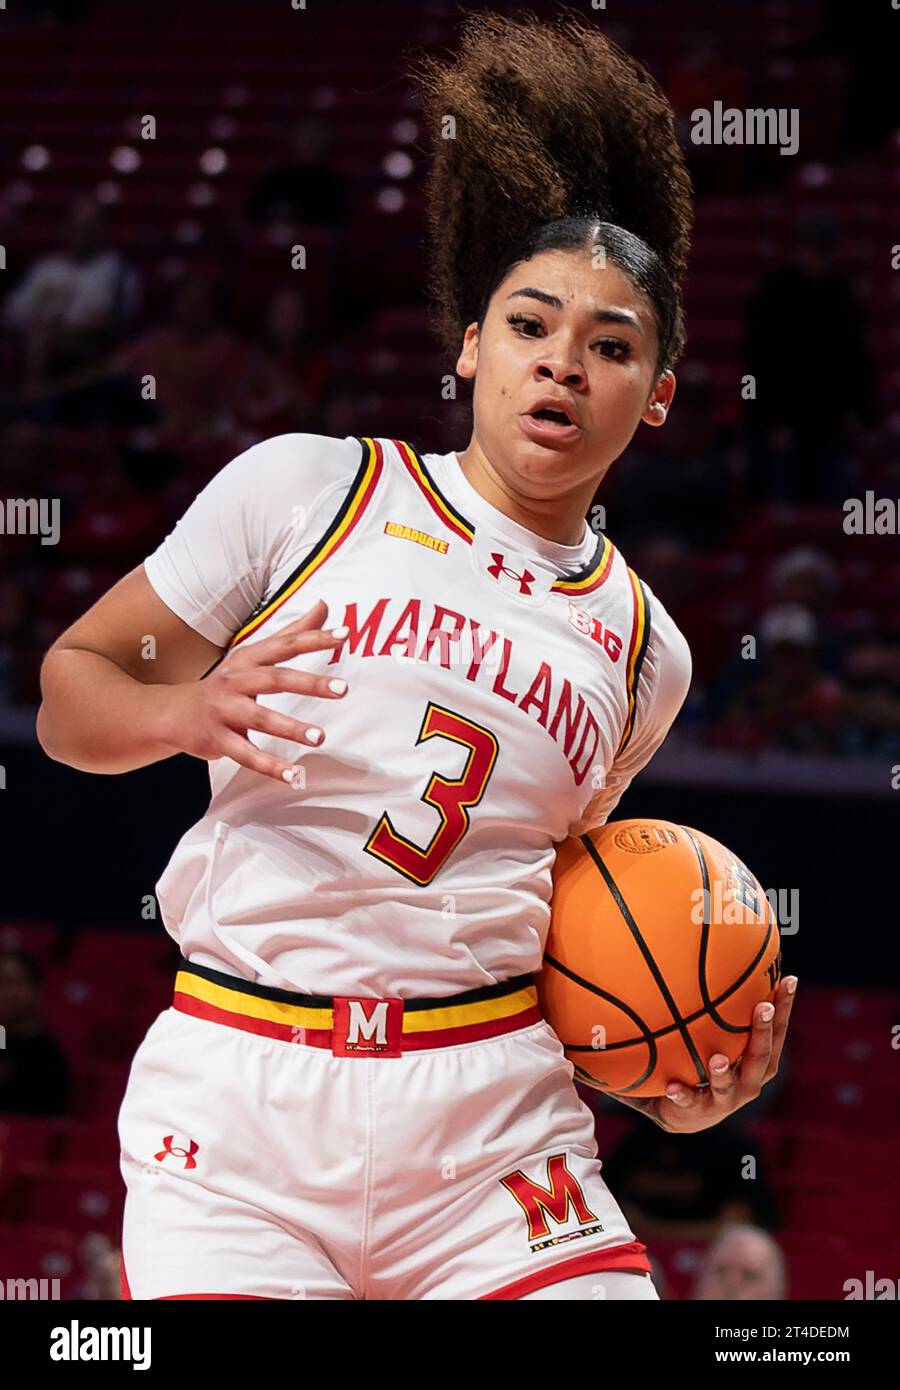 COLLEGE PARK, MD - OCTOBER 29: Maryland Terrapins guard Lavender Briggs (3) during a women's college basketball game between the Maryland Terrapins an Stock Photo